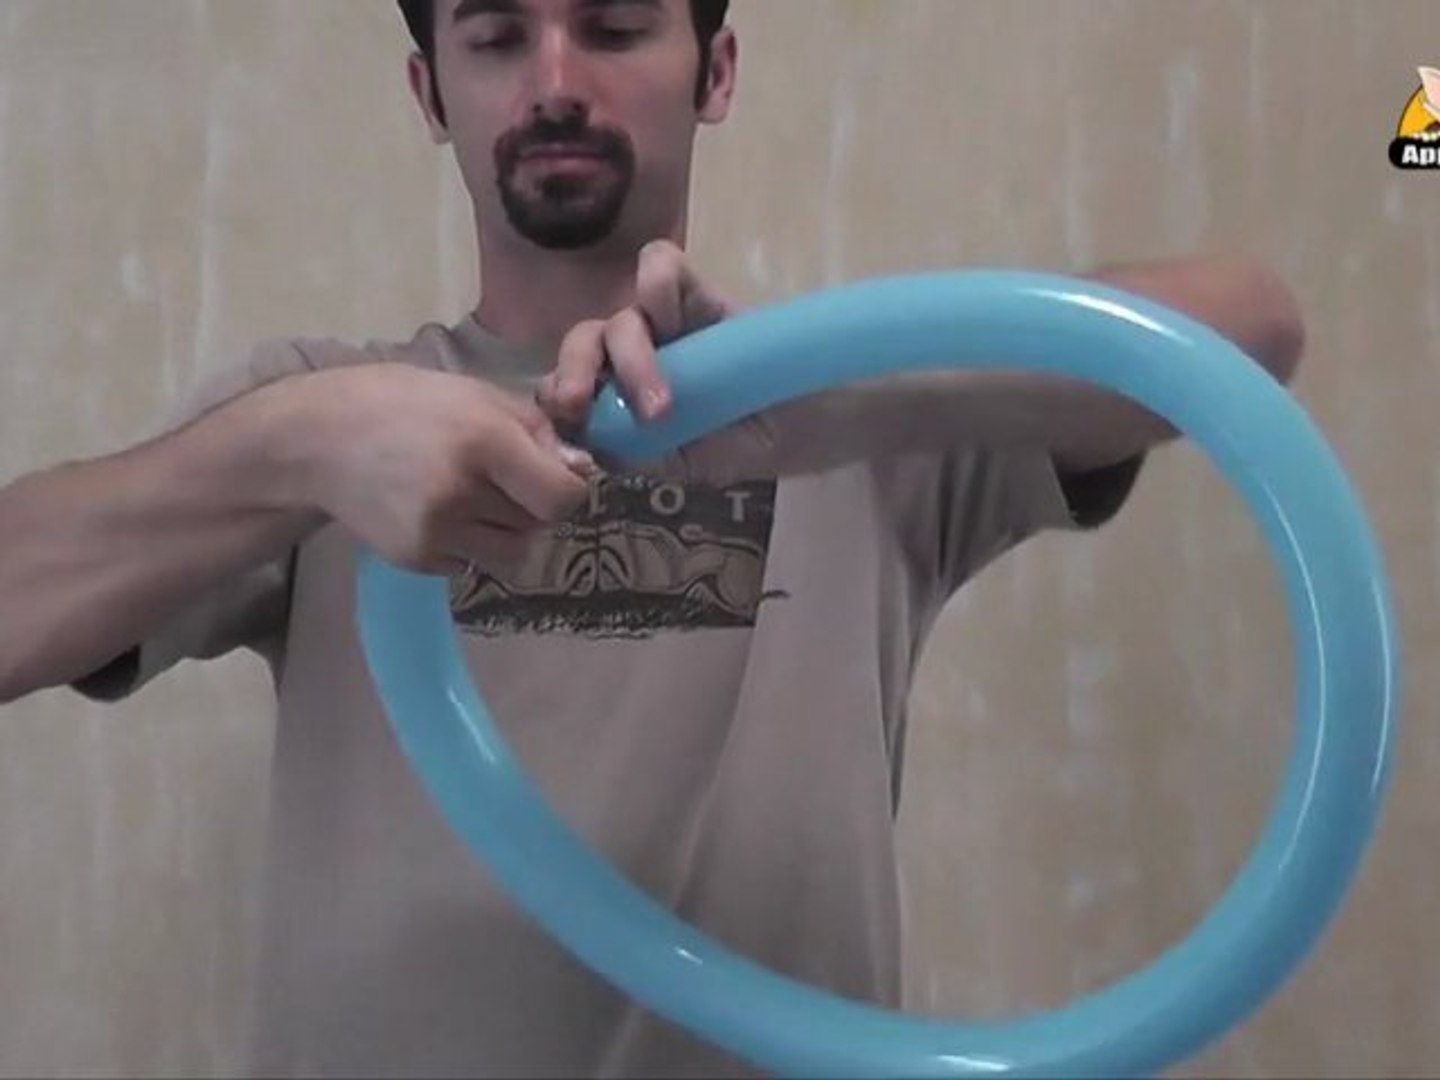 Balloon Sculpting - Easy way to sculpt a Dragonfly